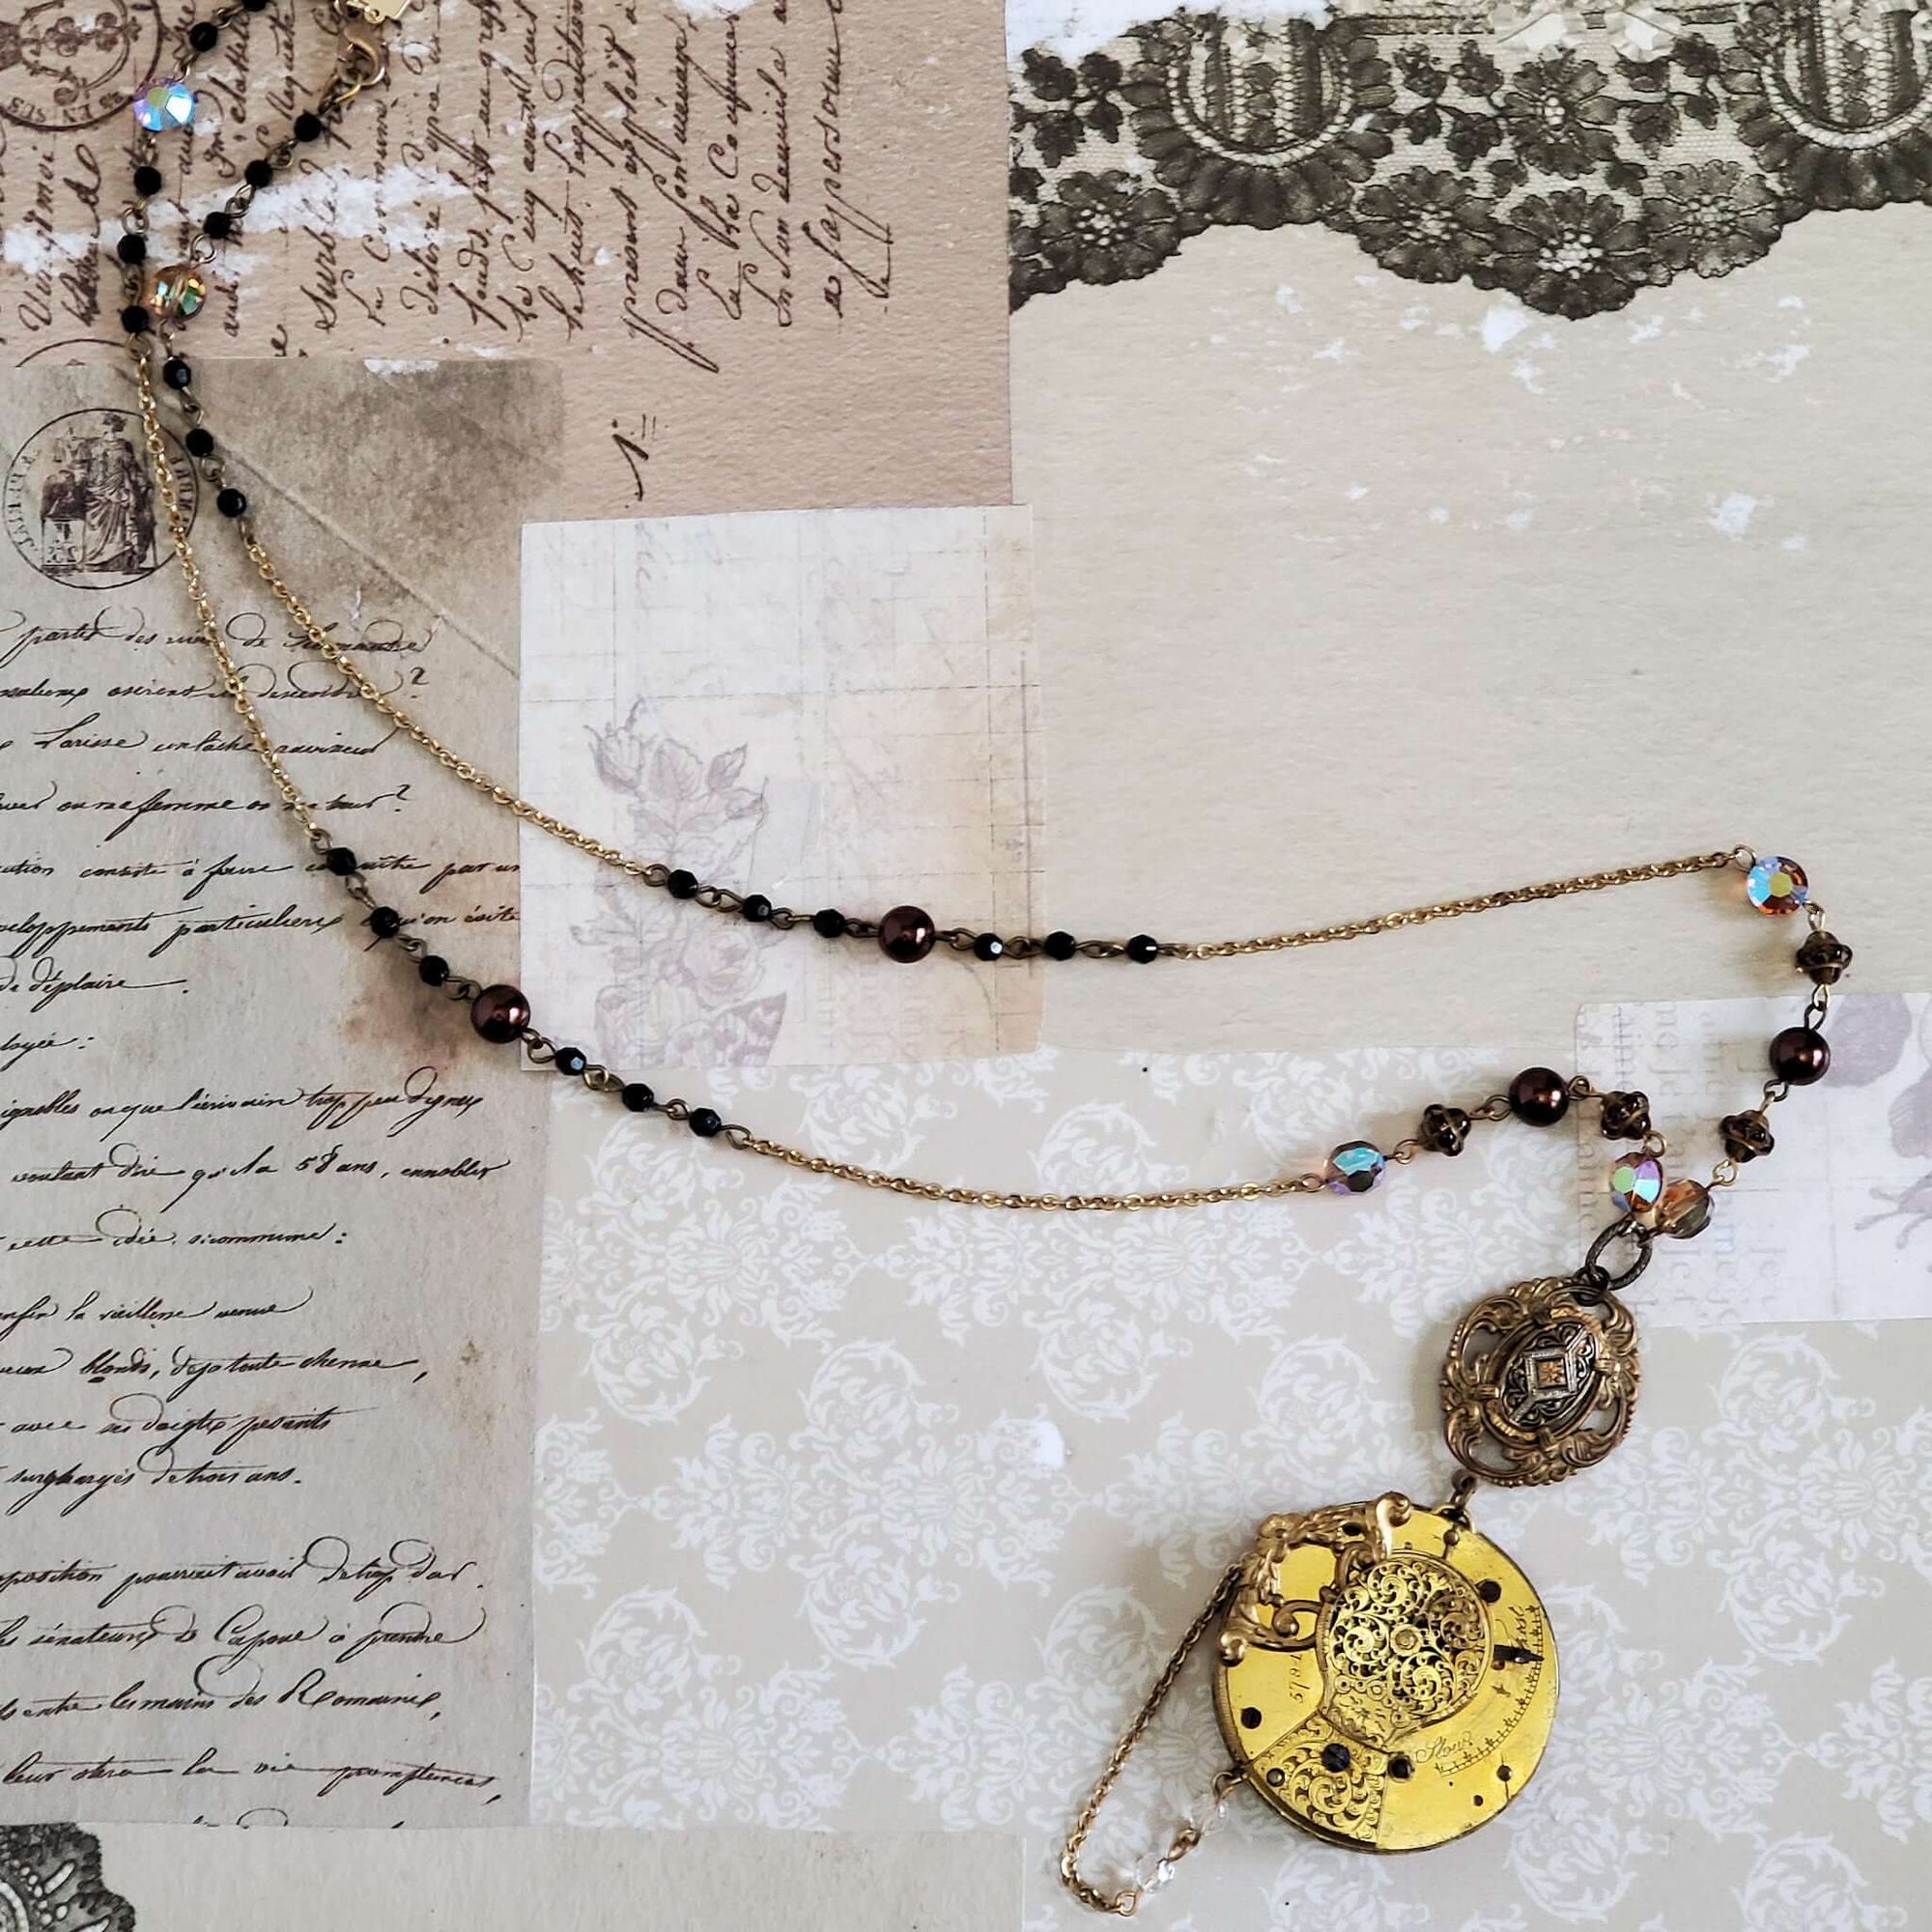 Repurposed Antique Watch Pendant Necklace with Vintage Beads and Chain